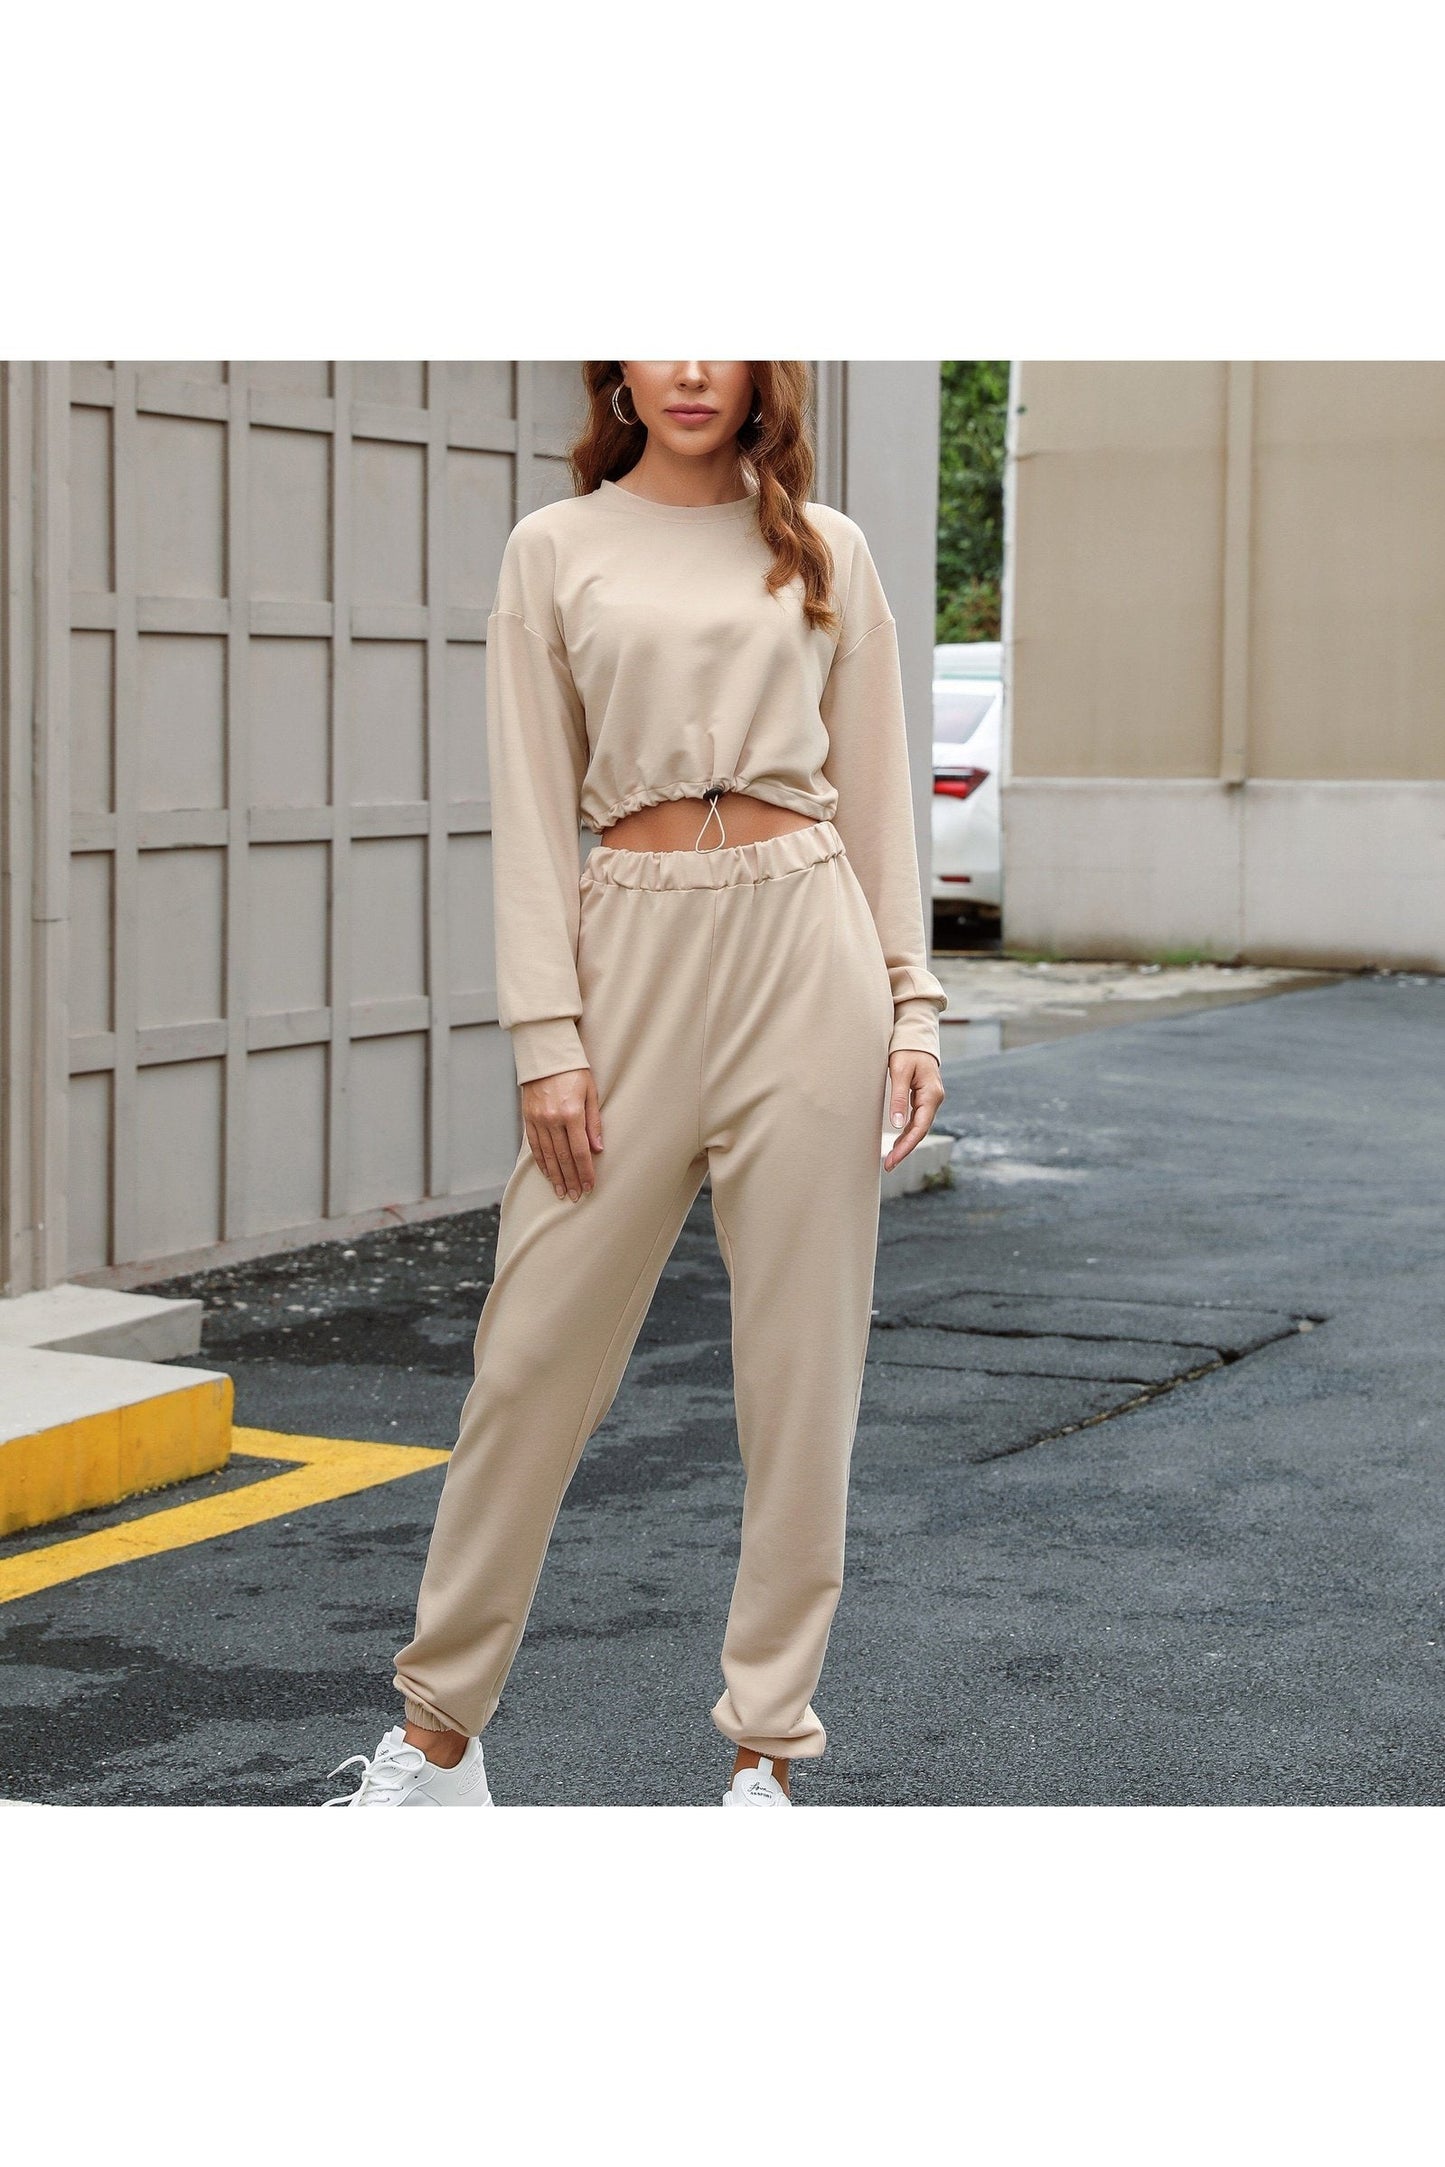 Round Neck Solid Color Basic Two-Piece Pants Set